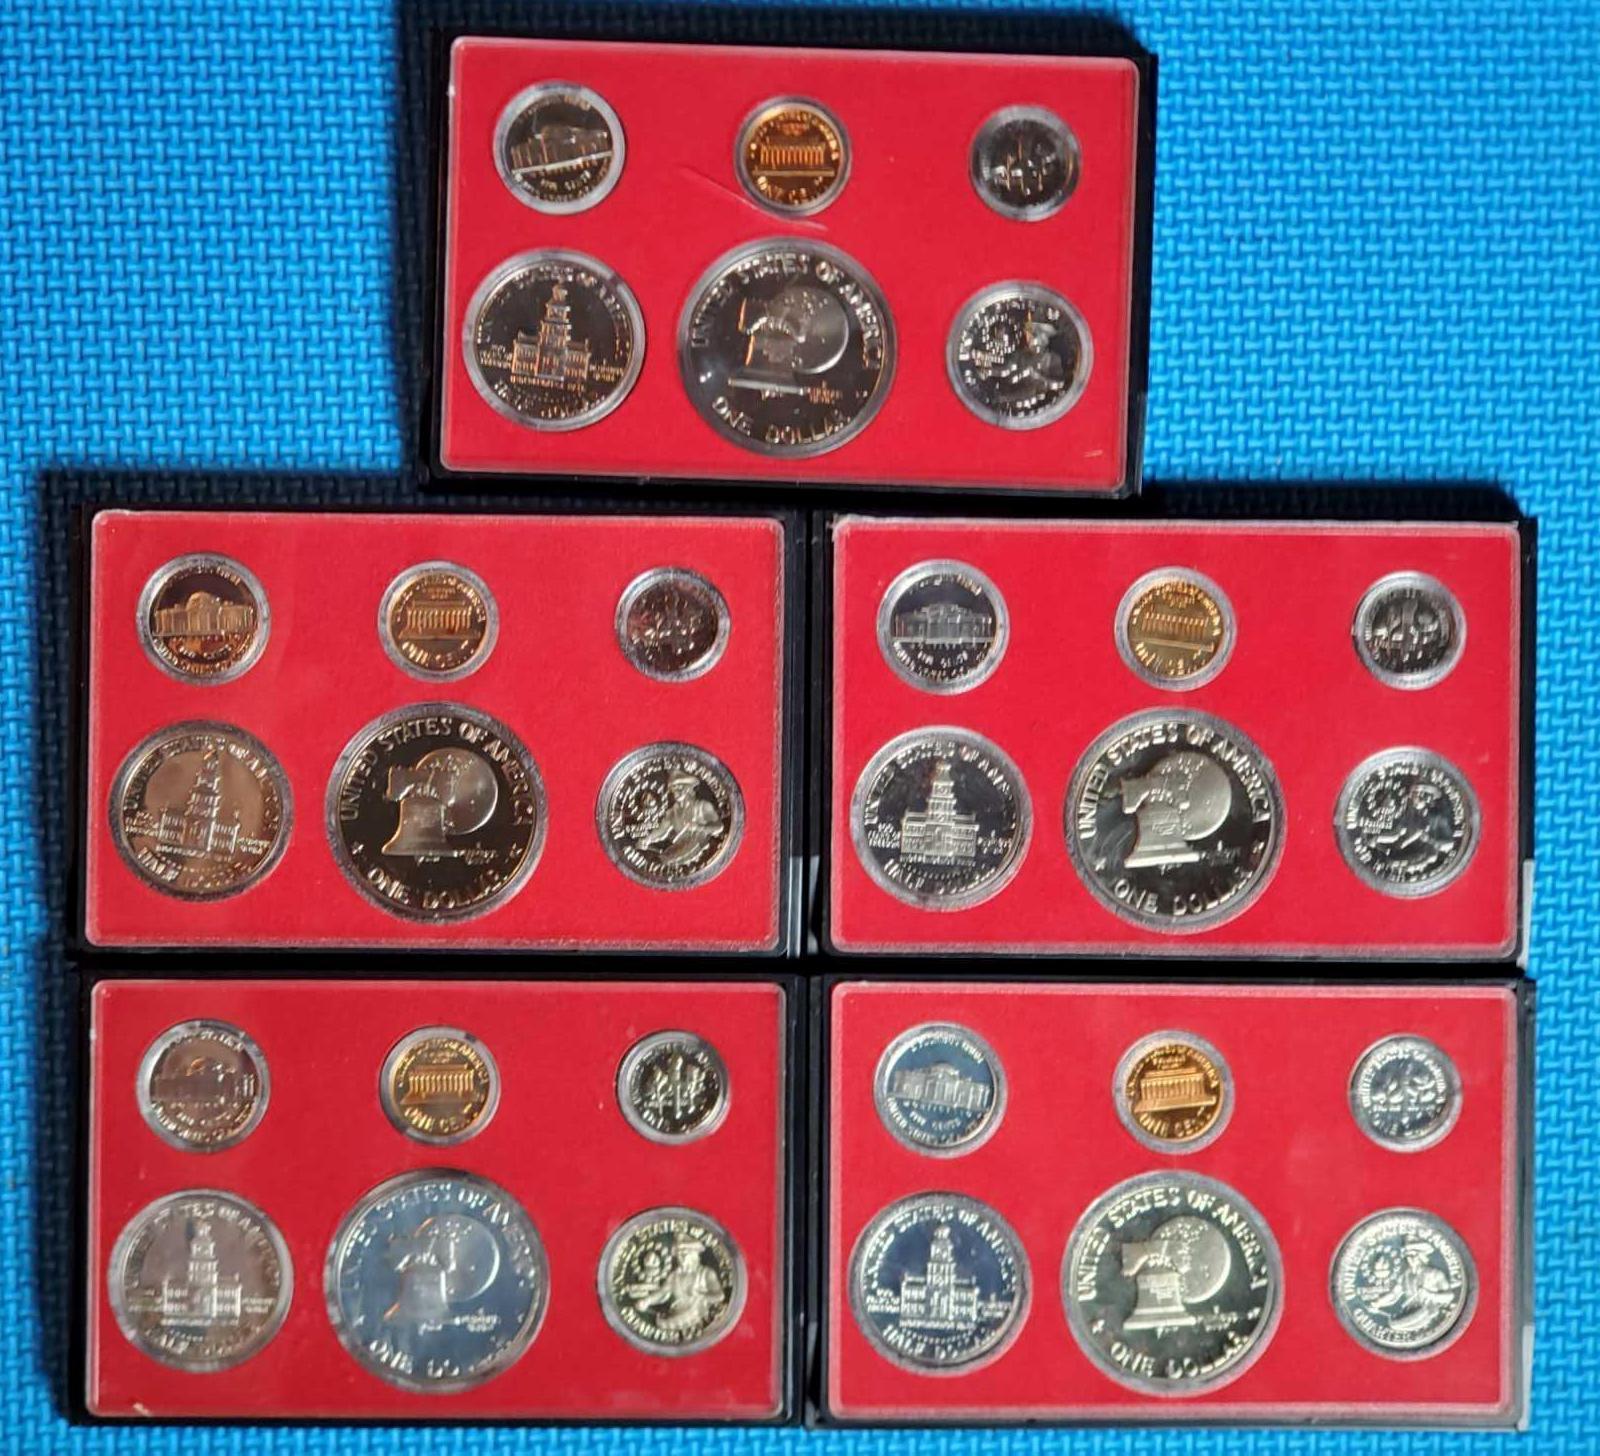 9 US Proof and 10 US Uncirculated Mint Sets